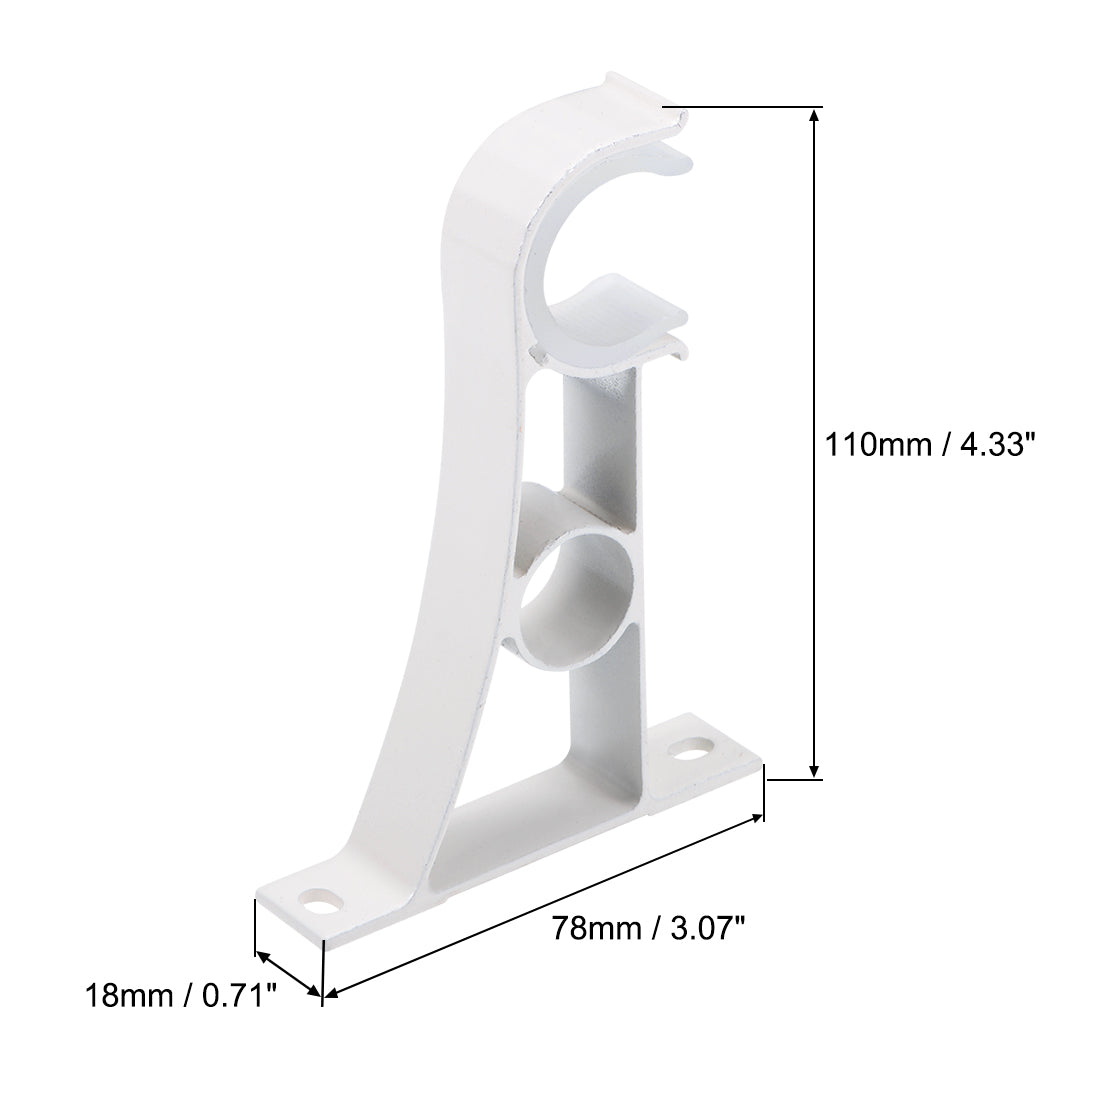 uxcell Uxcell Curtain Rod Bracket Aluminum Alloy Single Holder Support for 25mm Drapery Rod 110 x 78 x 18mm White